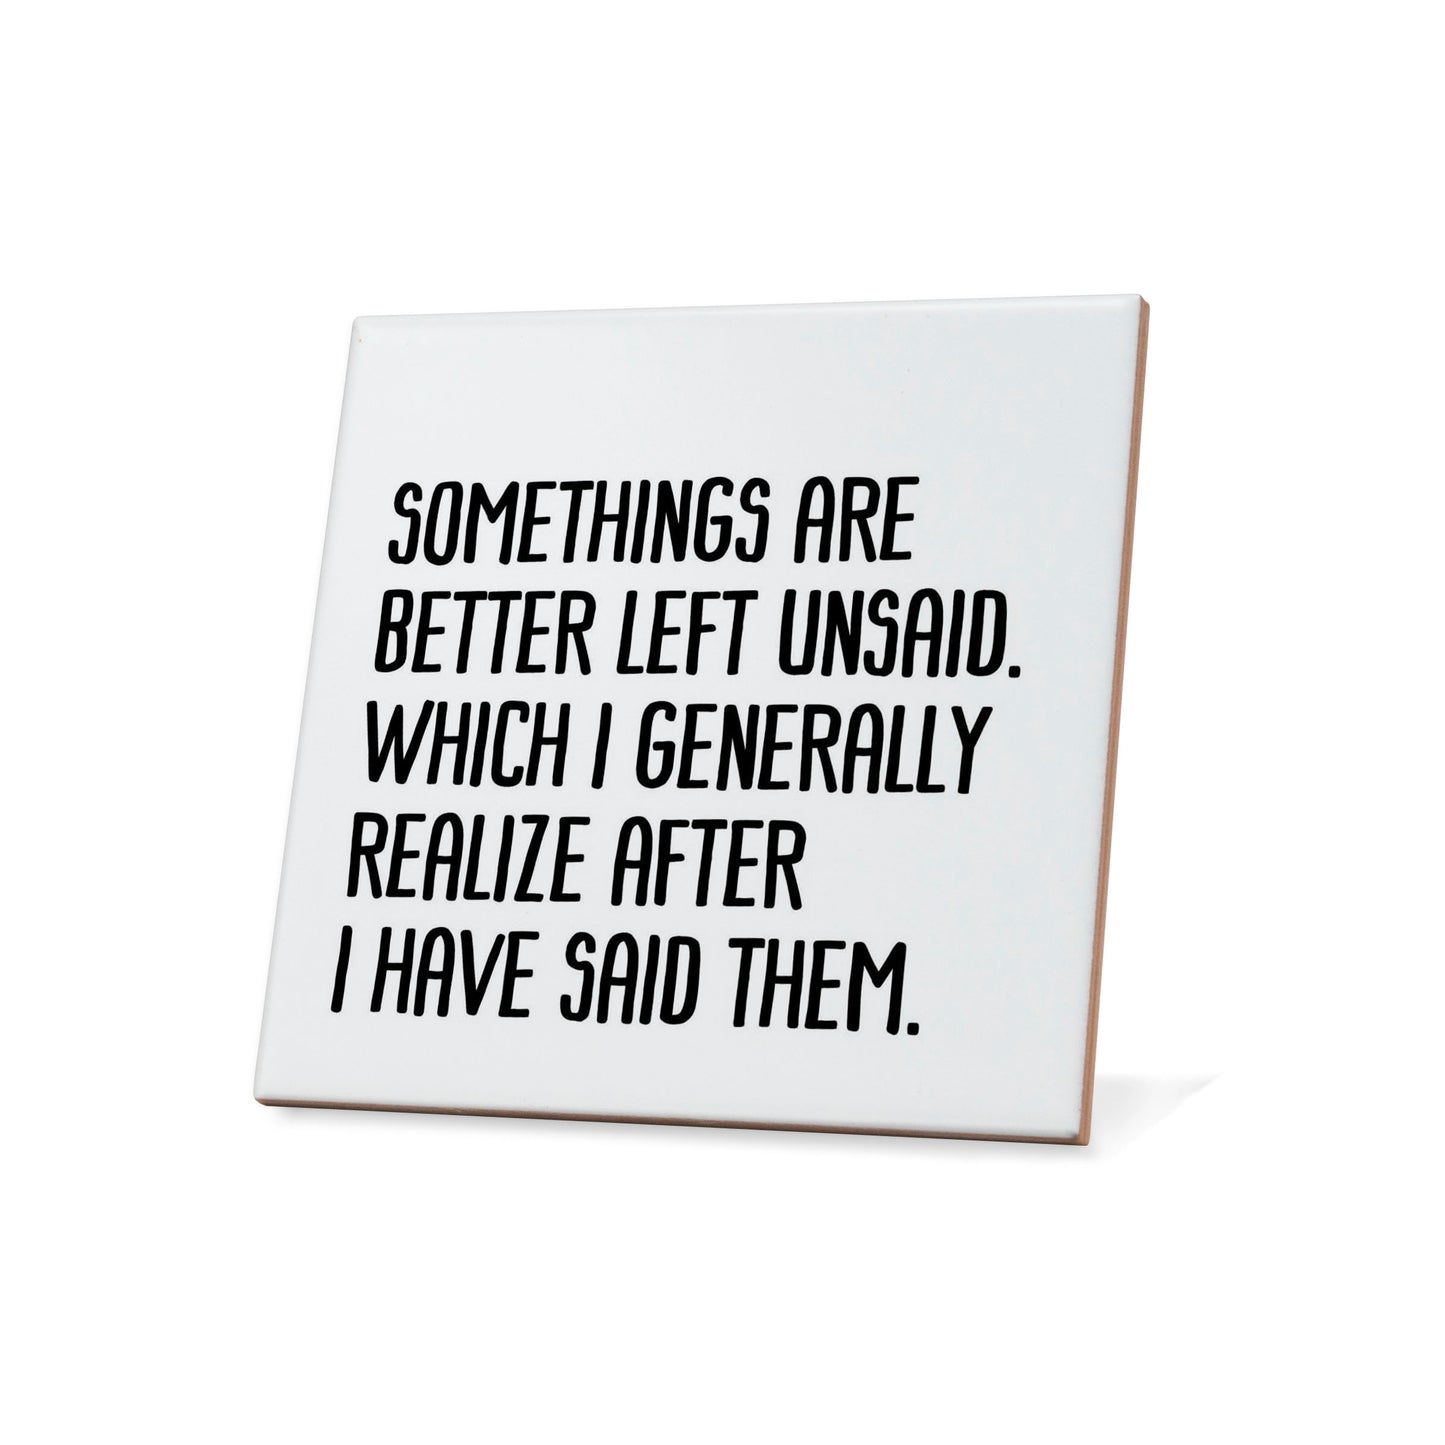 Somethings are better left unsaid....  Quote Coaster